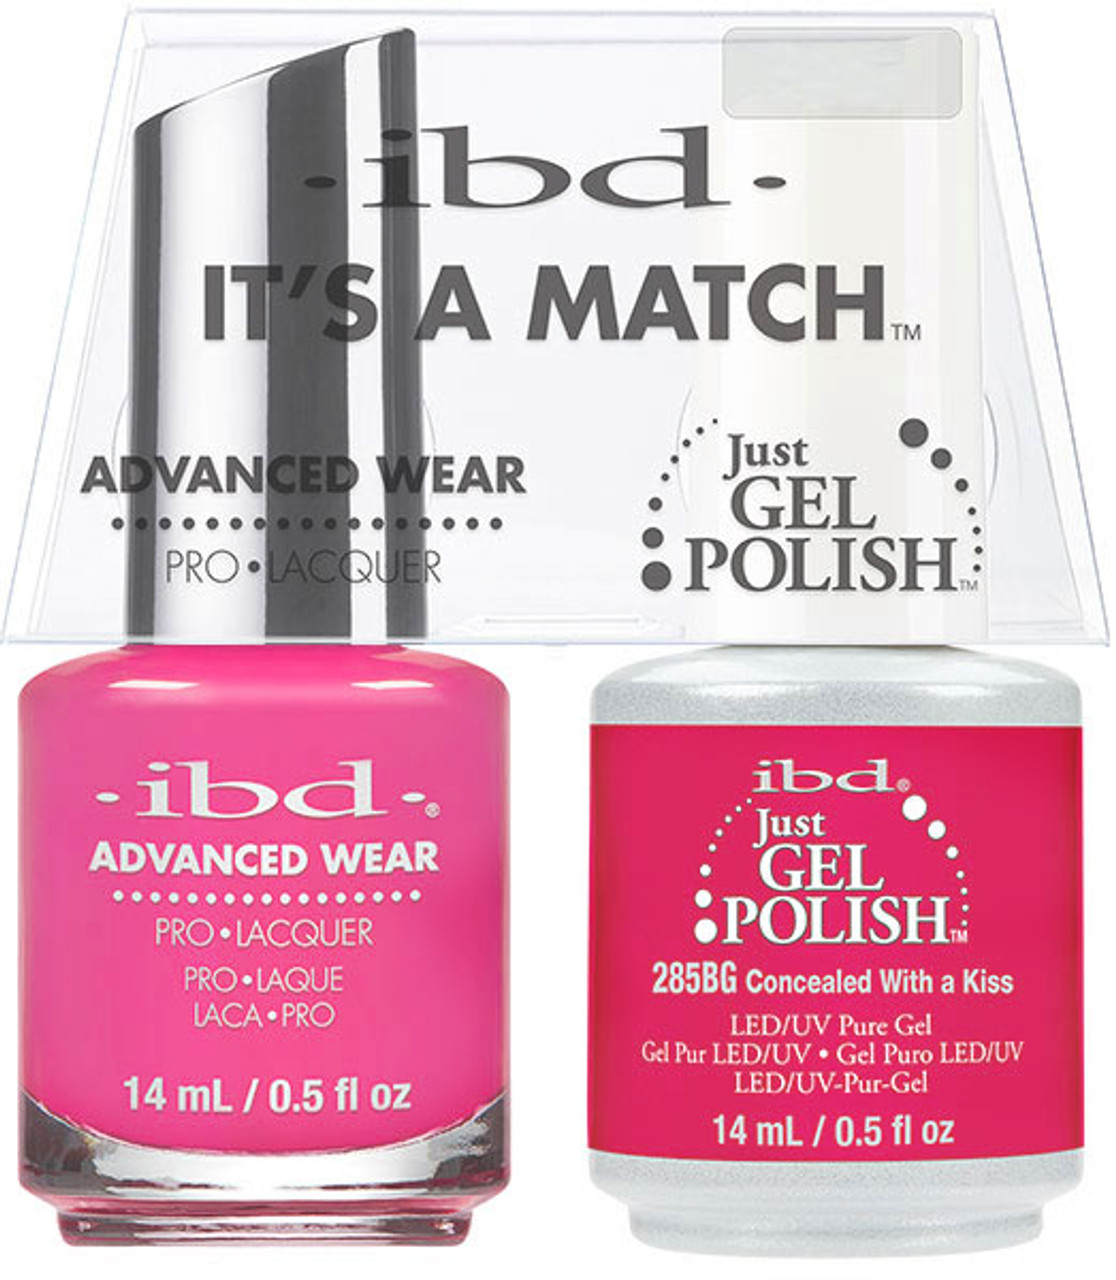 ibd It's A Match Advanced Wear Duo 282BD Concealed With a Kiss - 14 mL/ .5 oz